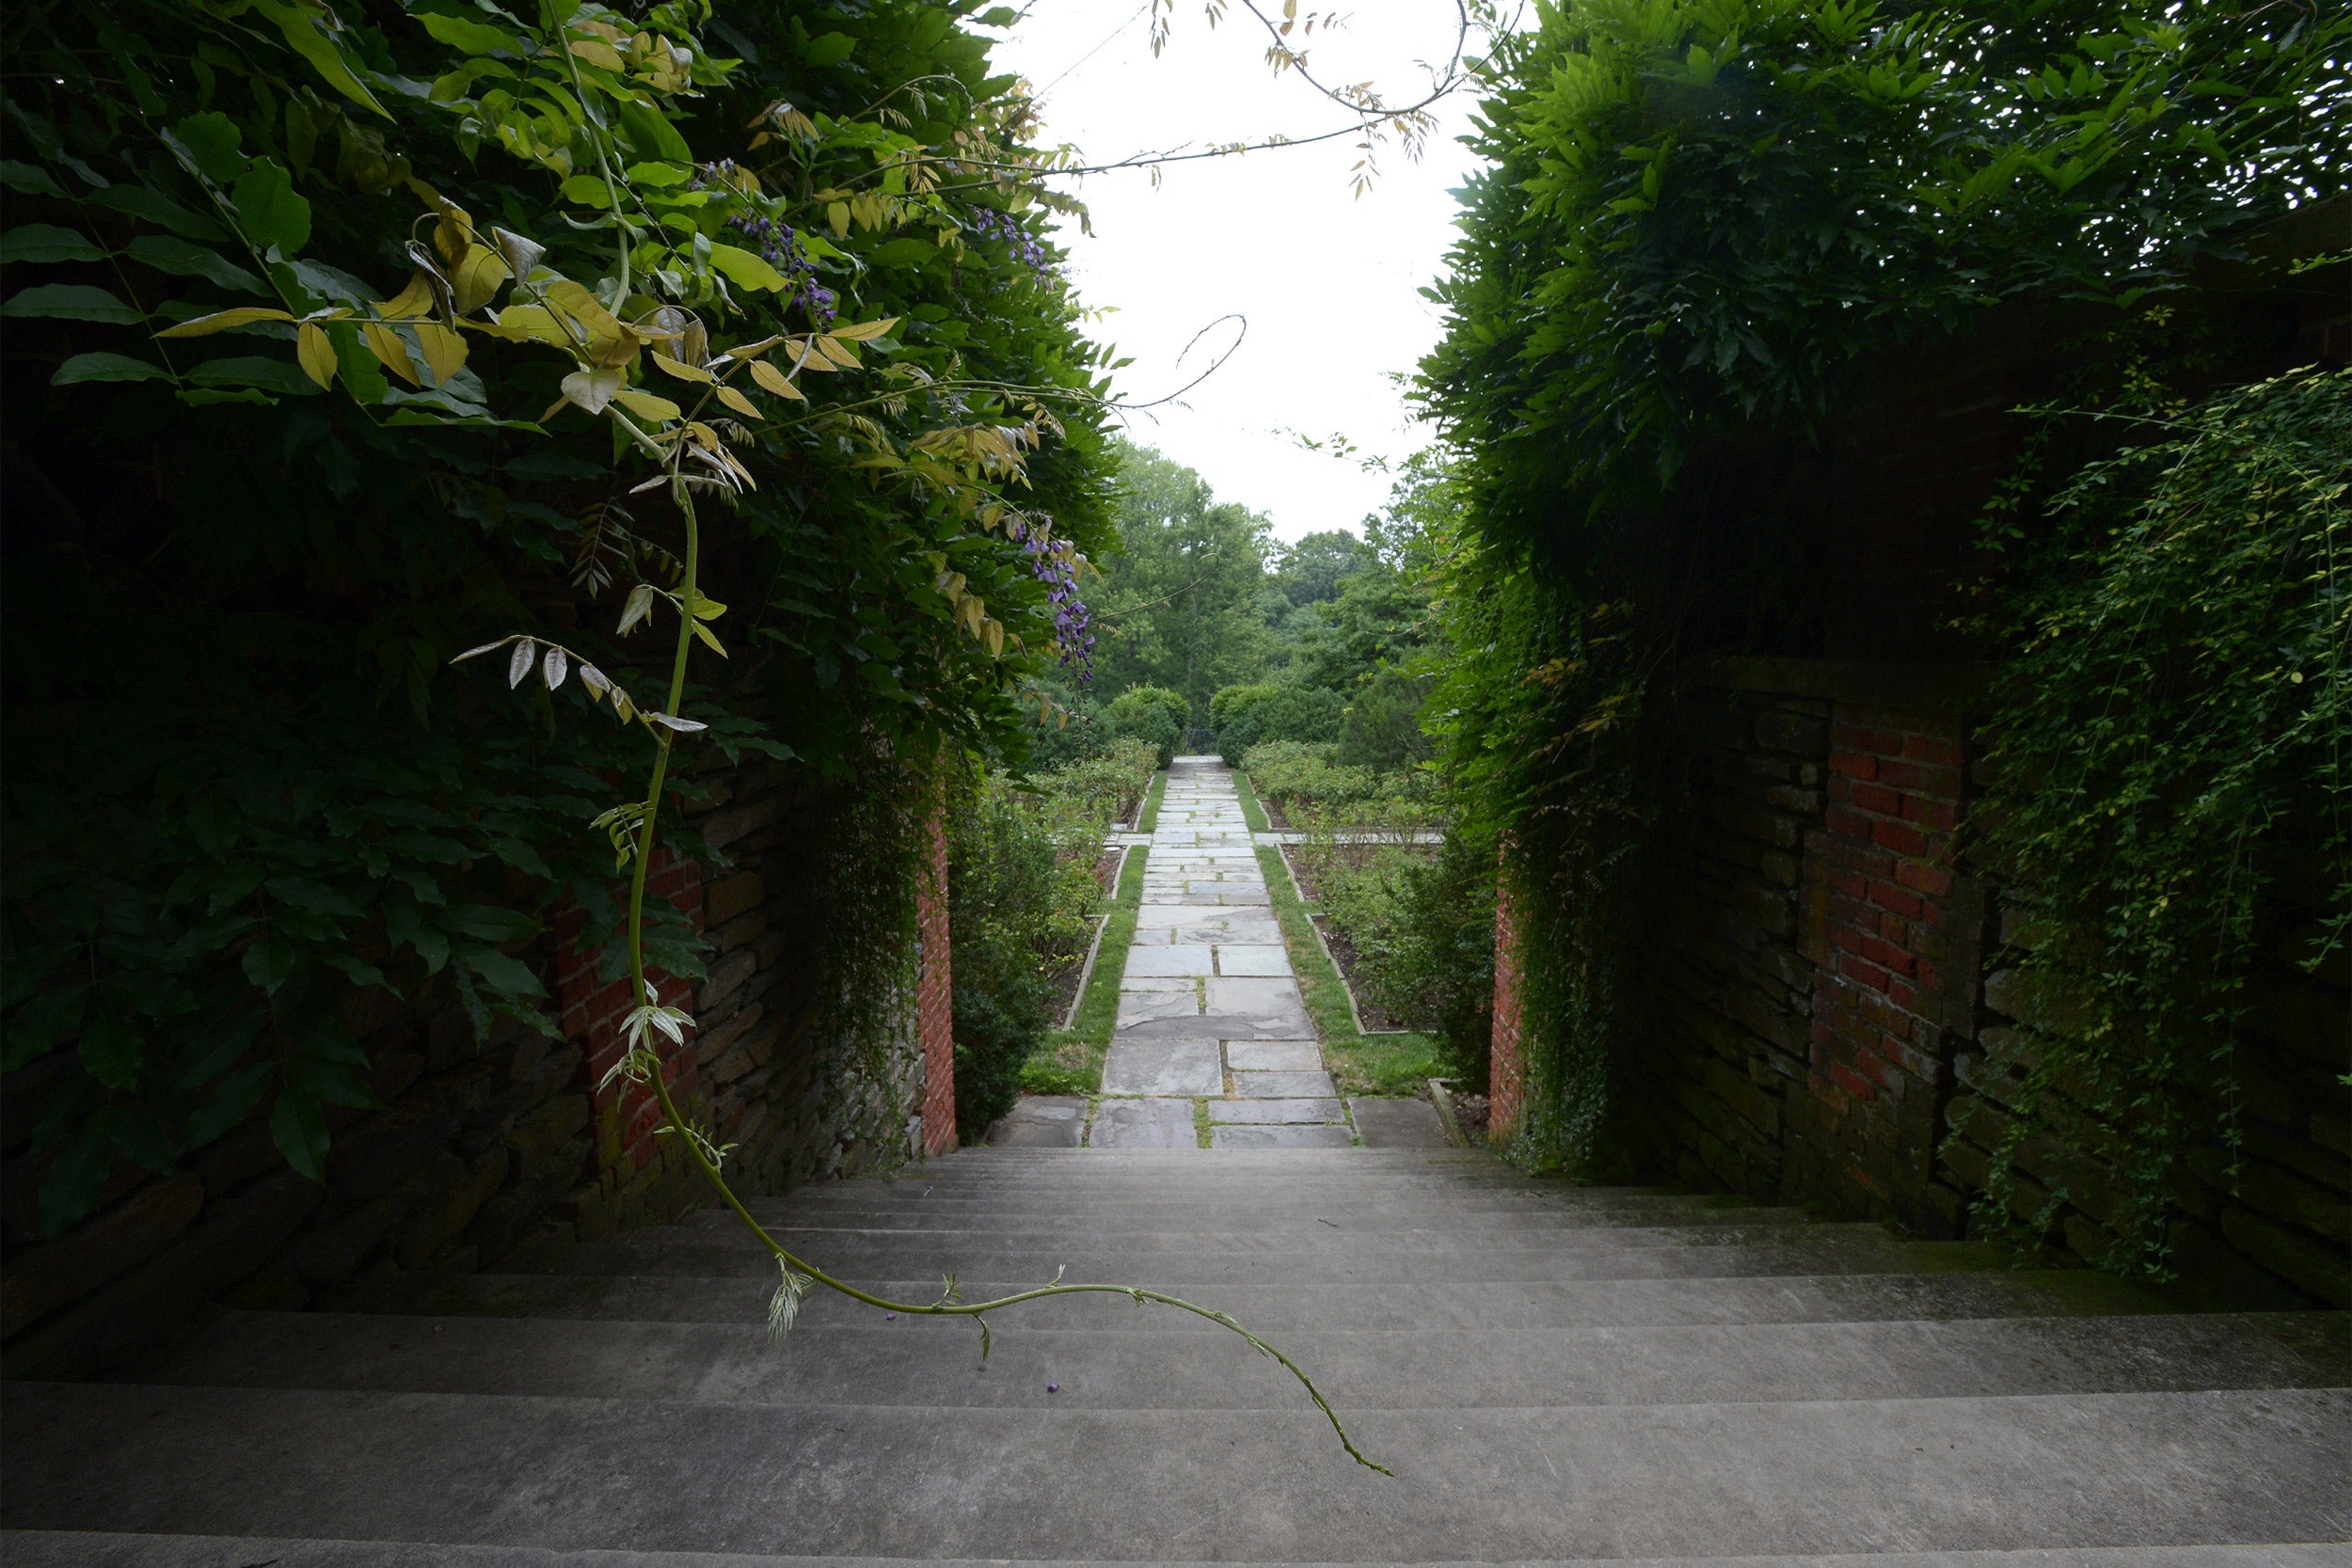 Dumbarton Oaks Research Library and Collections garden.